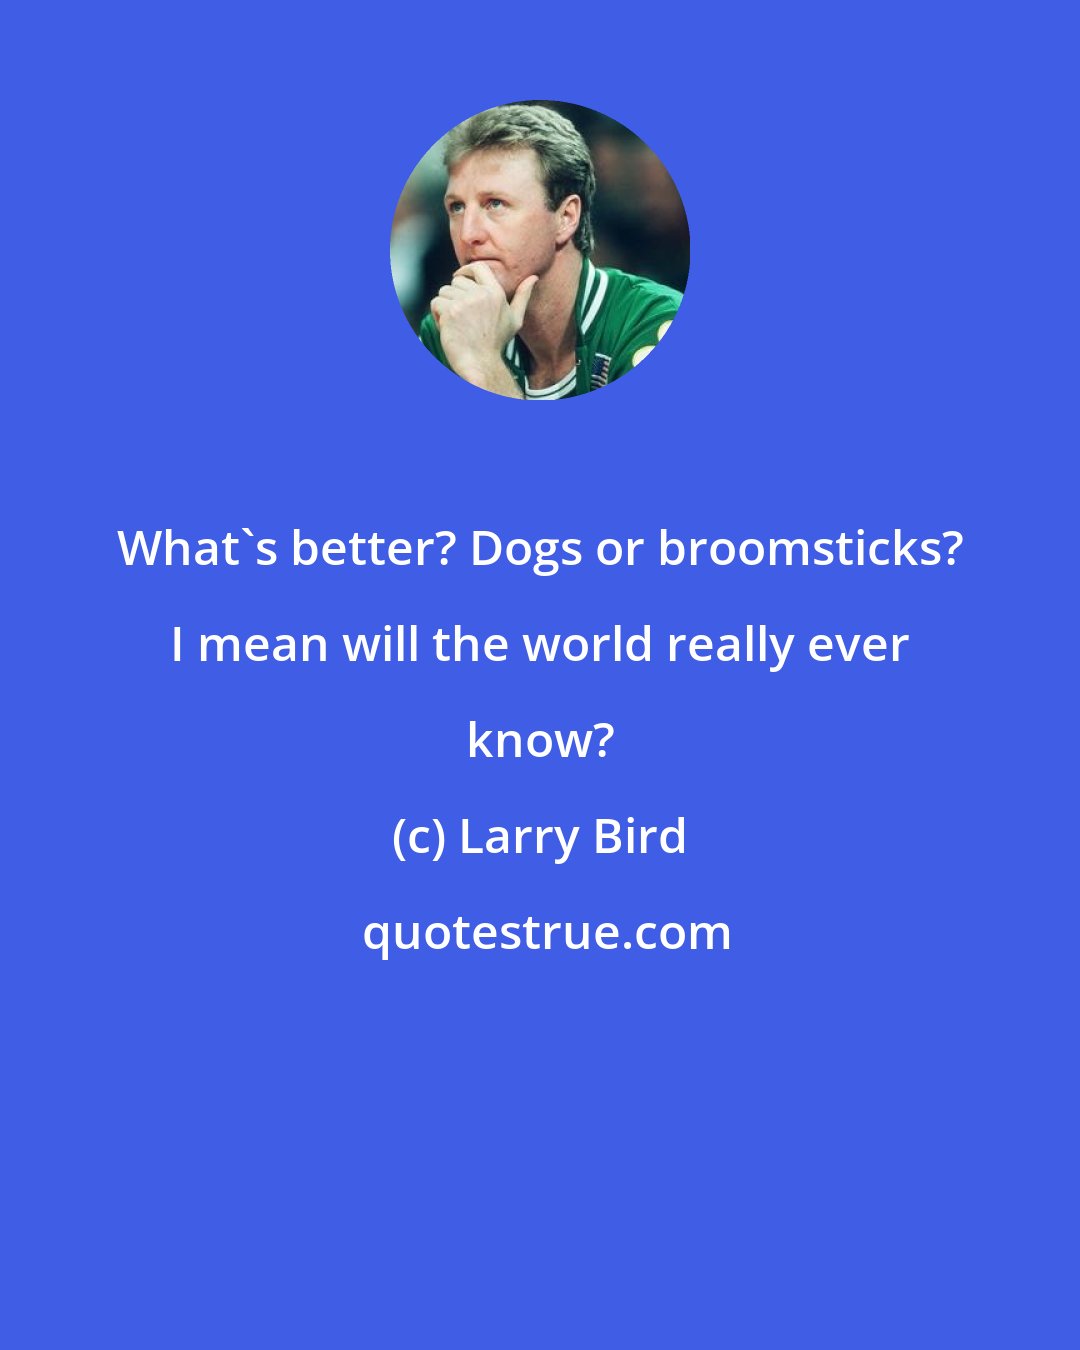 Larry Bird: What's better? Dogs or broomsticks? I mean will the world really ever know?